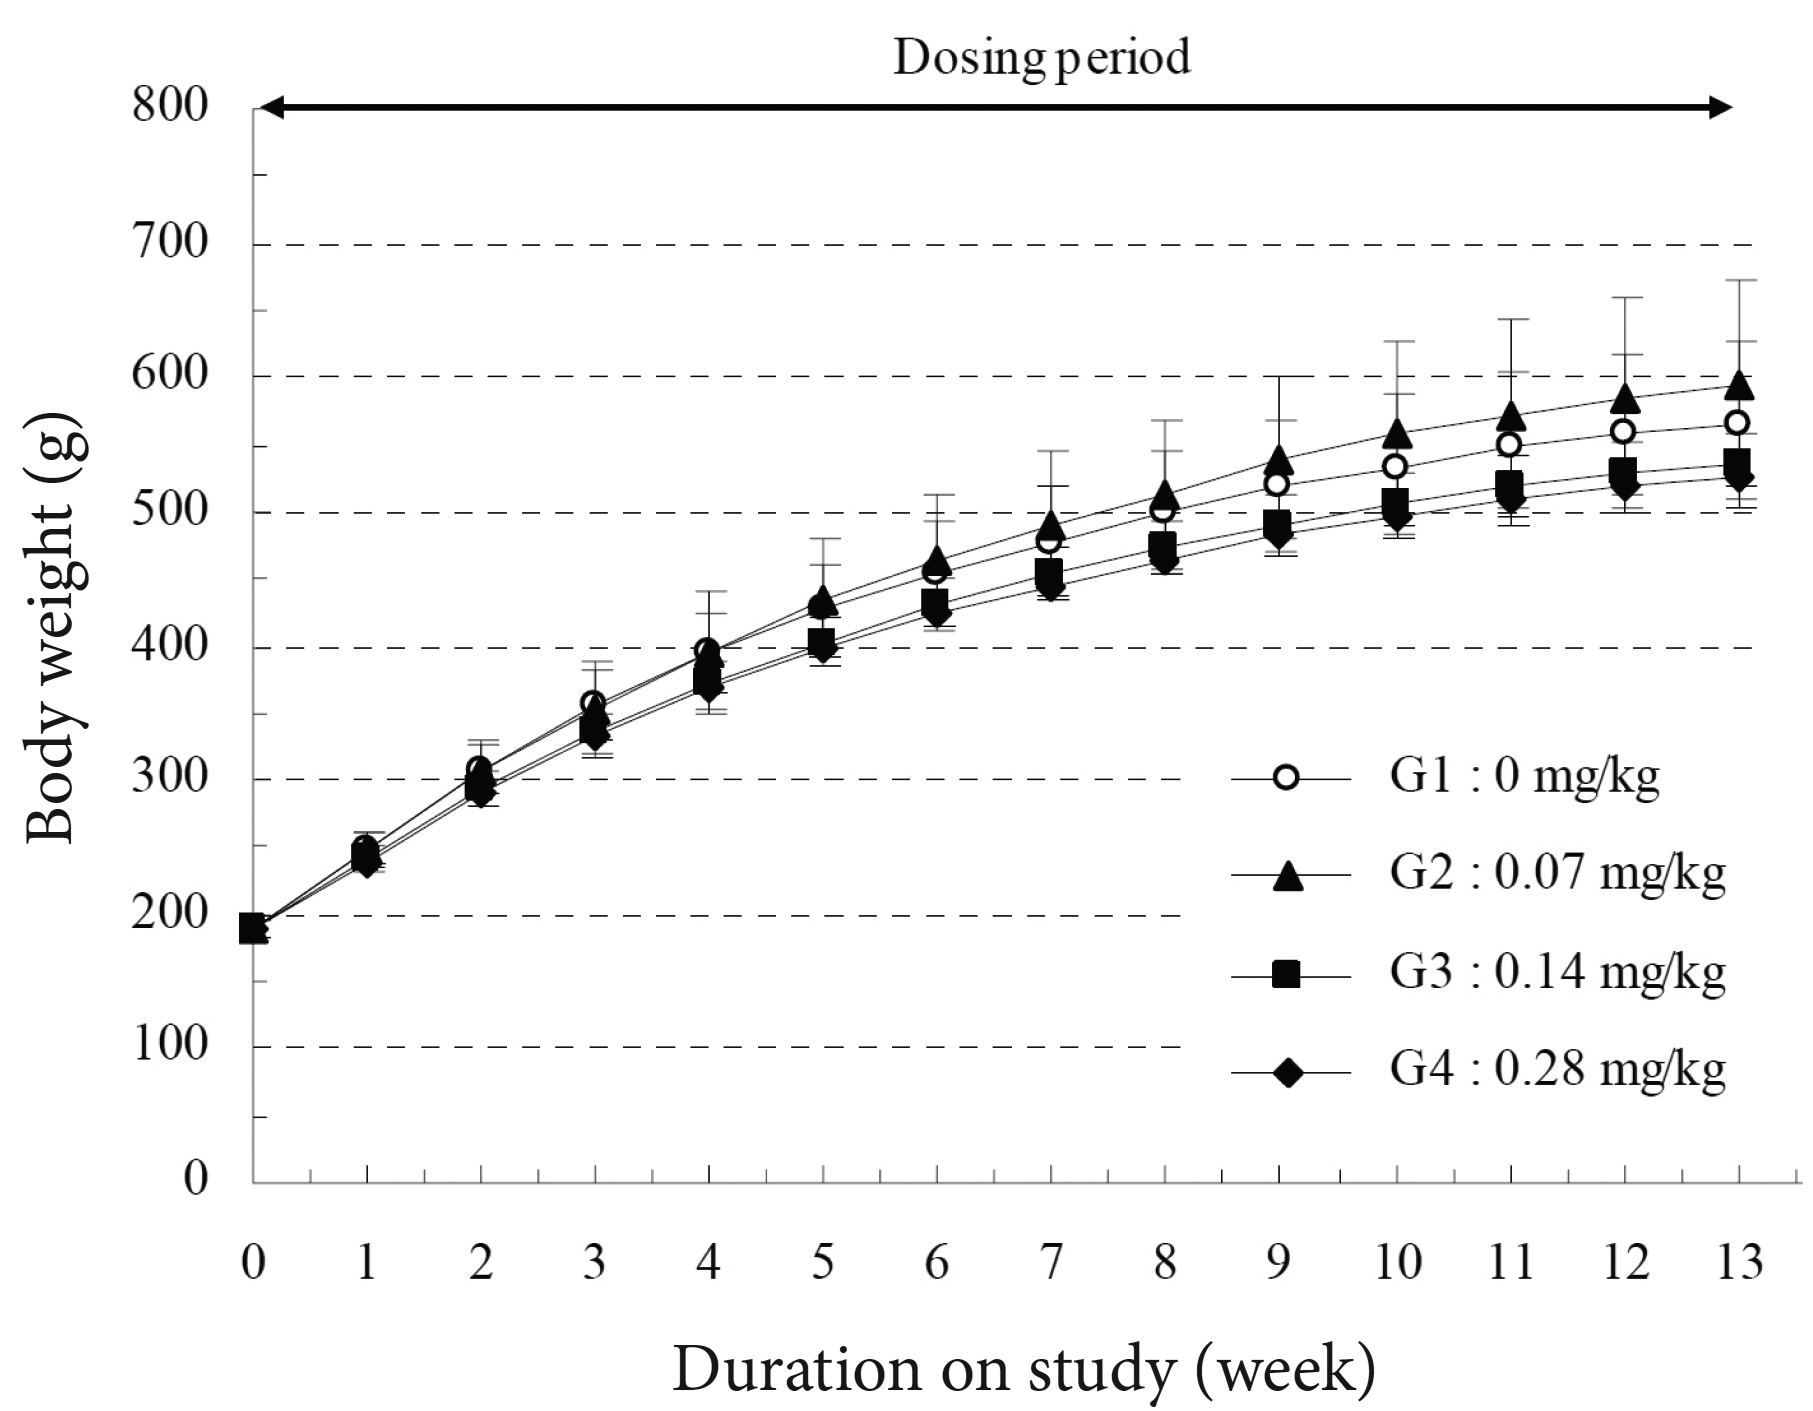 Body weights of the male SD rats during 13-week, repeated intramuscular dose, toxicity study. The high-dosage (0.28 mg/kg) male
group showed a significant decrease in body weight during 2 to 4 weeks of treatment period (Dunnett’s t-test, P < 0.05).